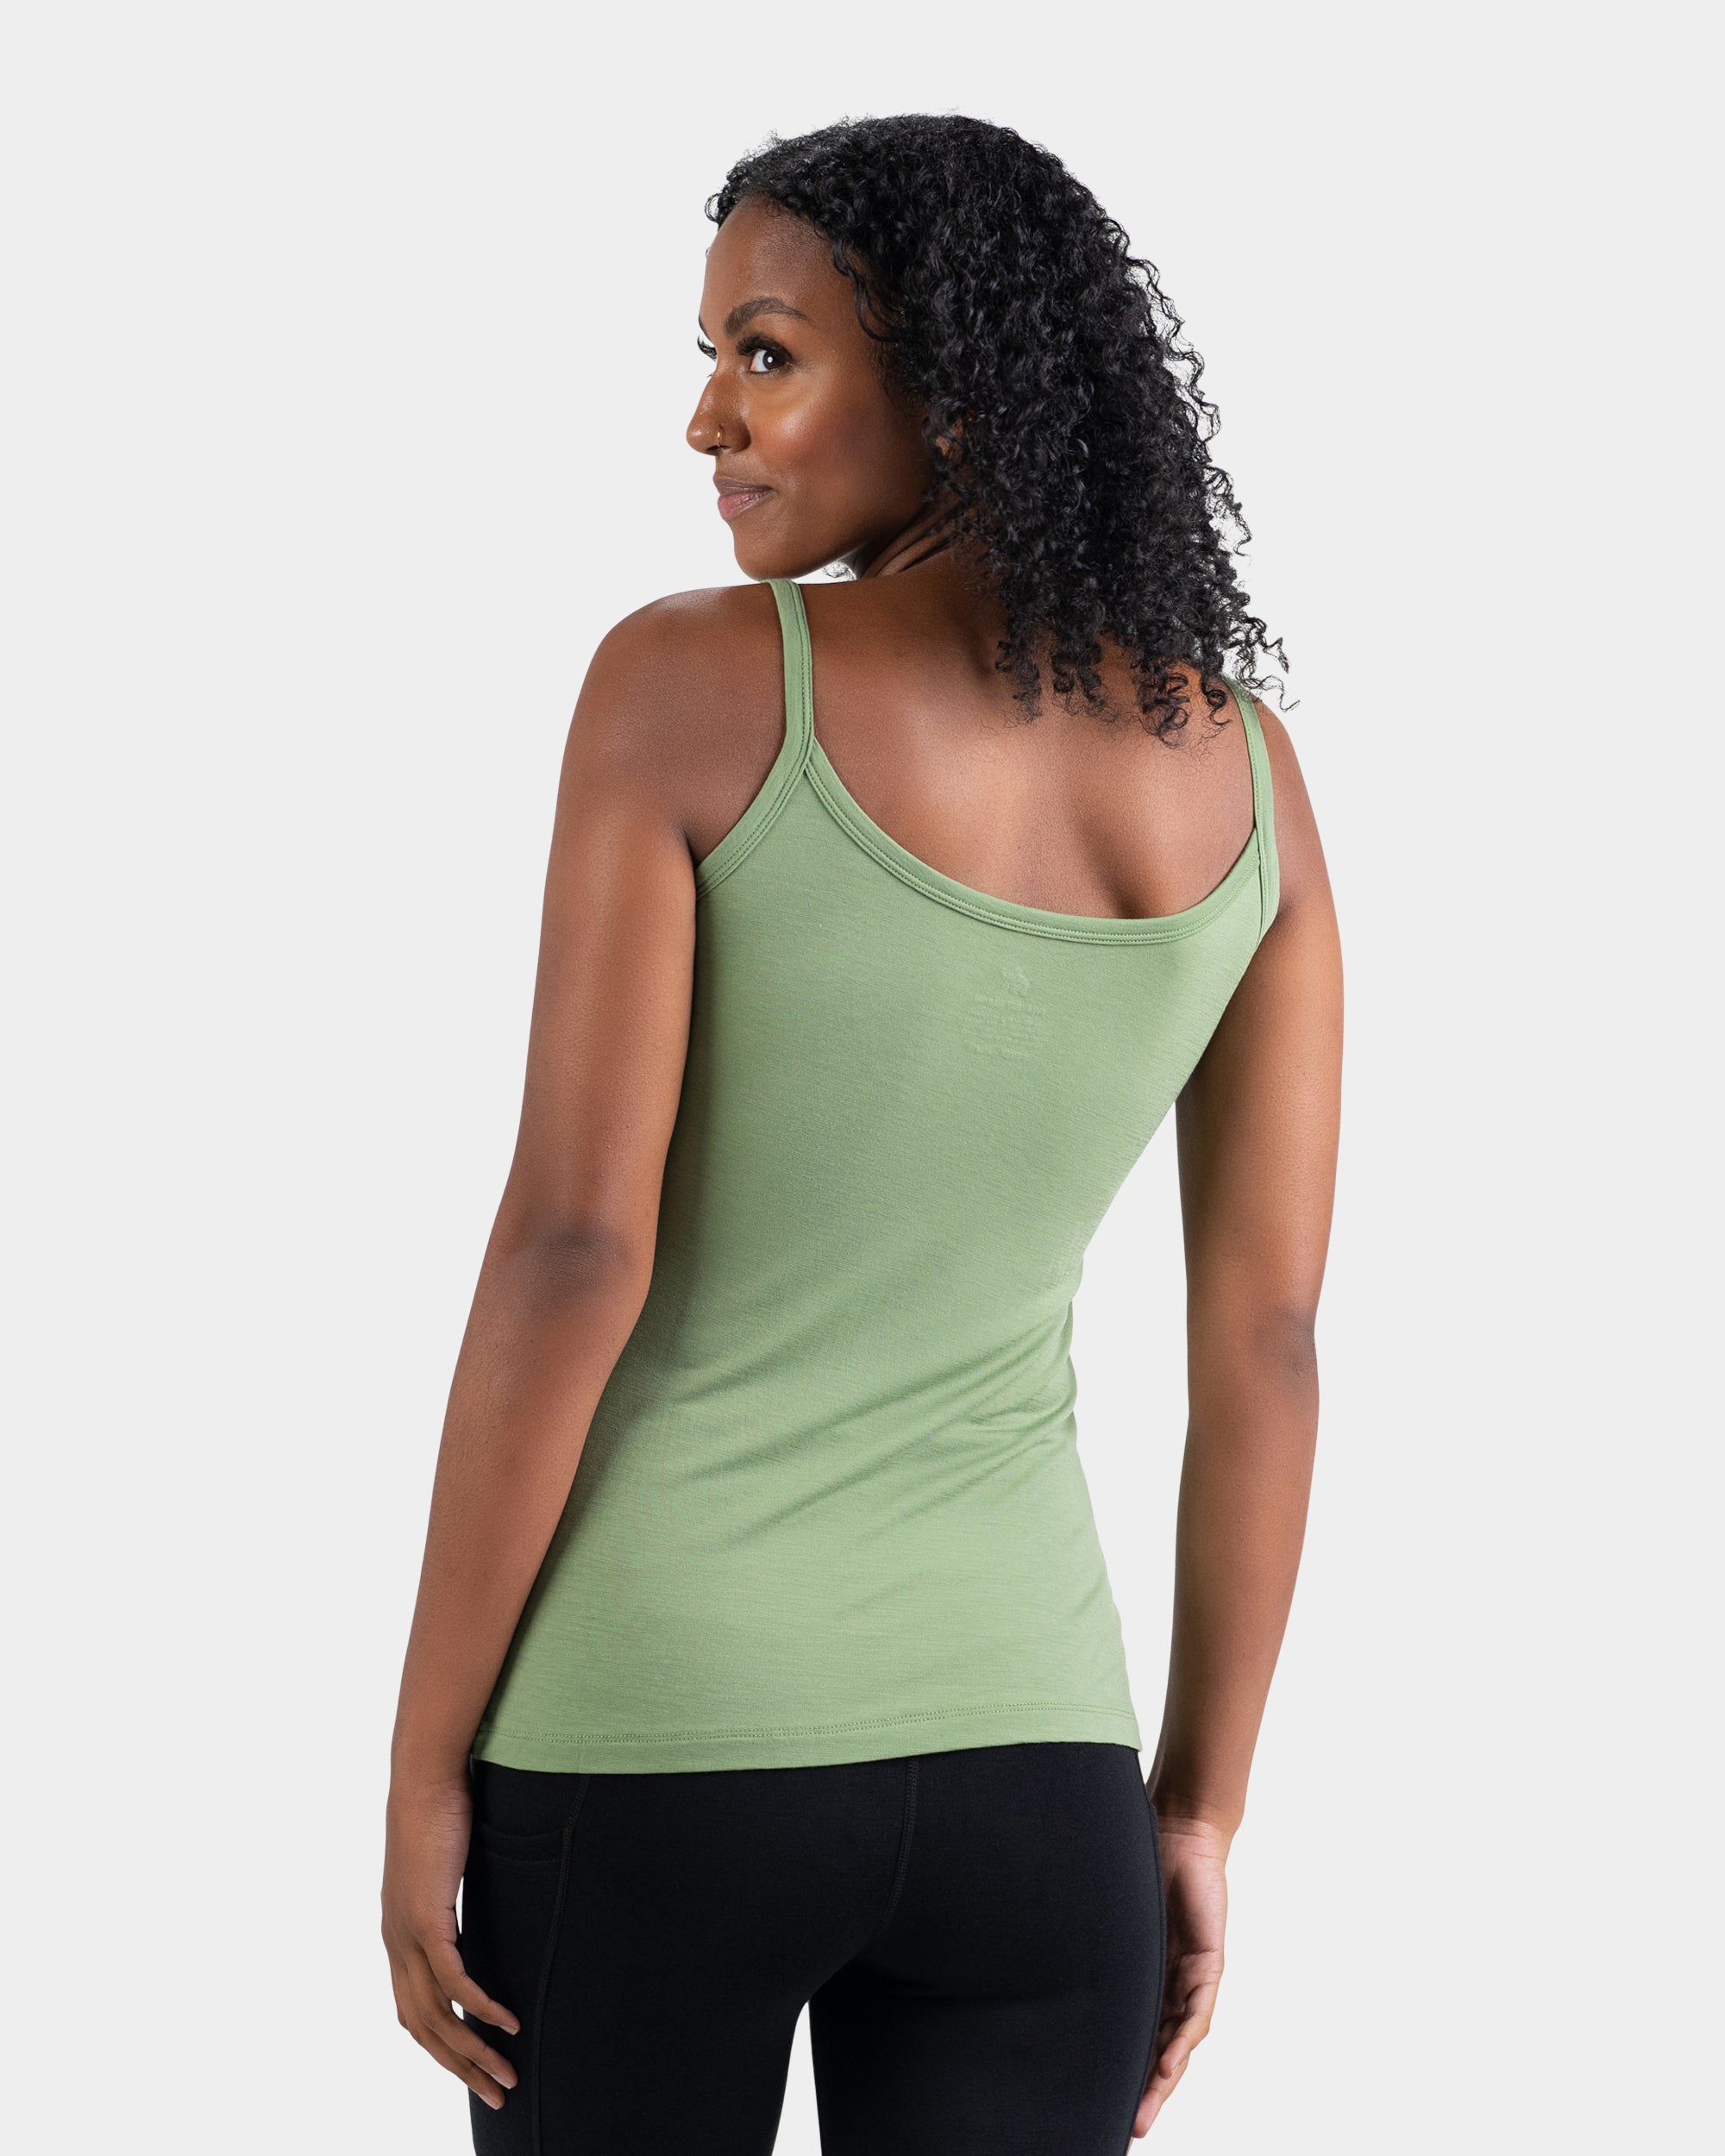 Terra Lifestyle Ribbed Racerback Tank Top for Women Workout Athletic A –  Terra Lifestyle Co